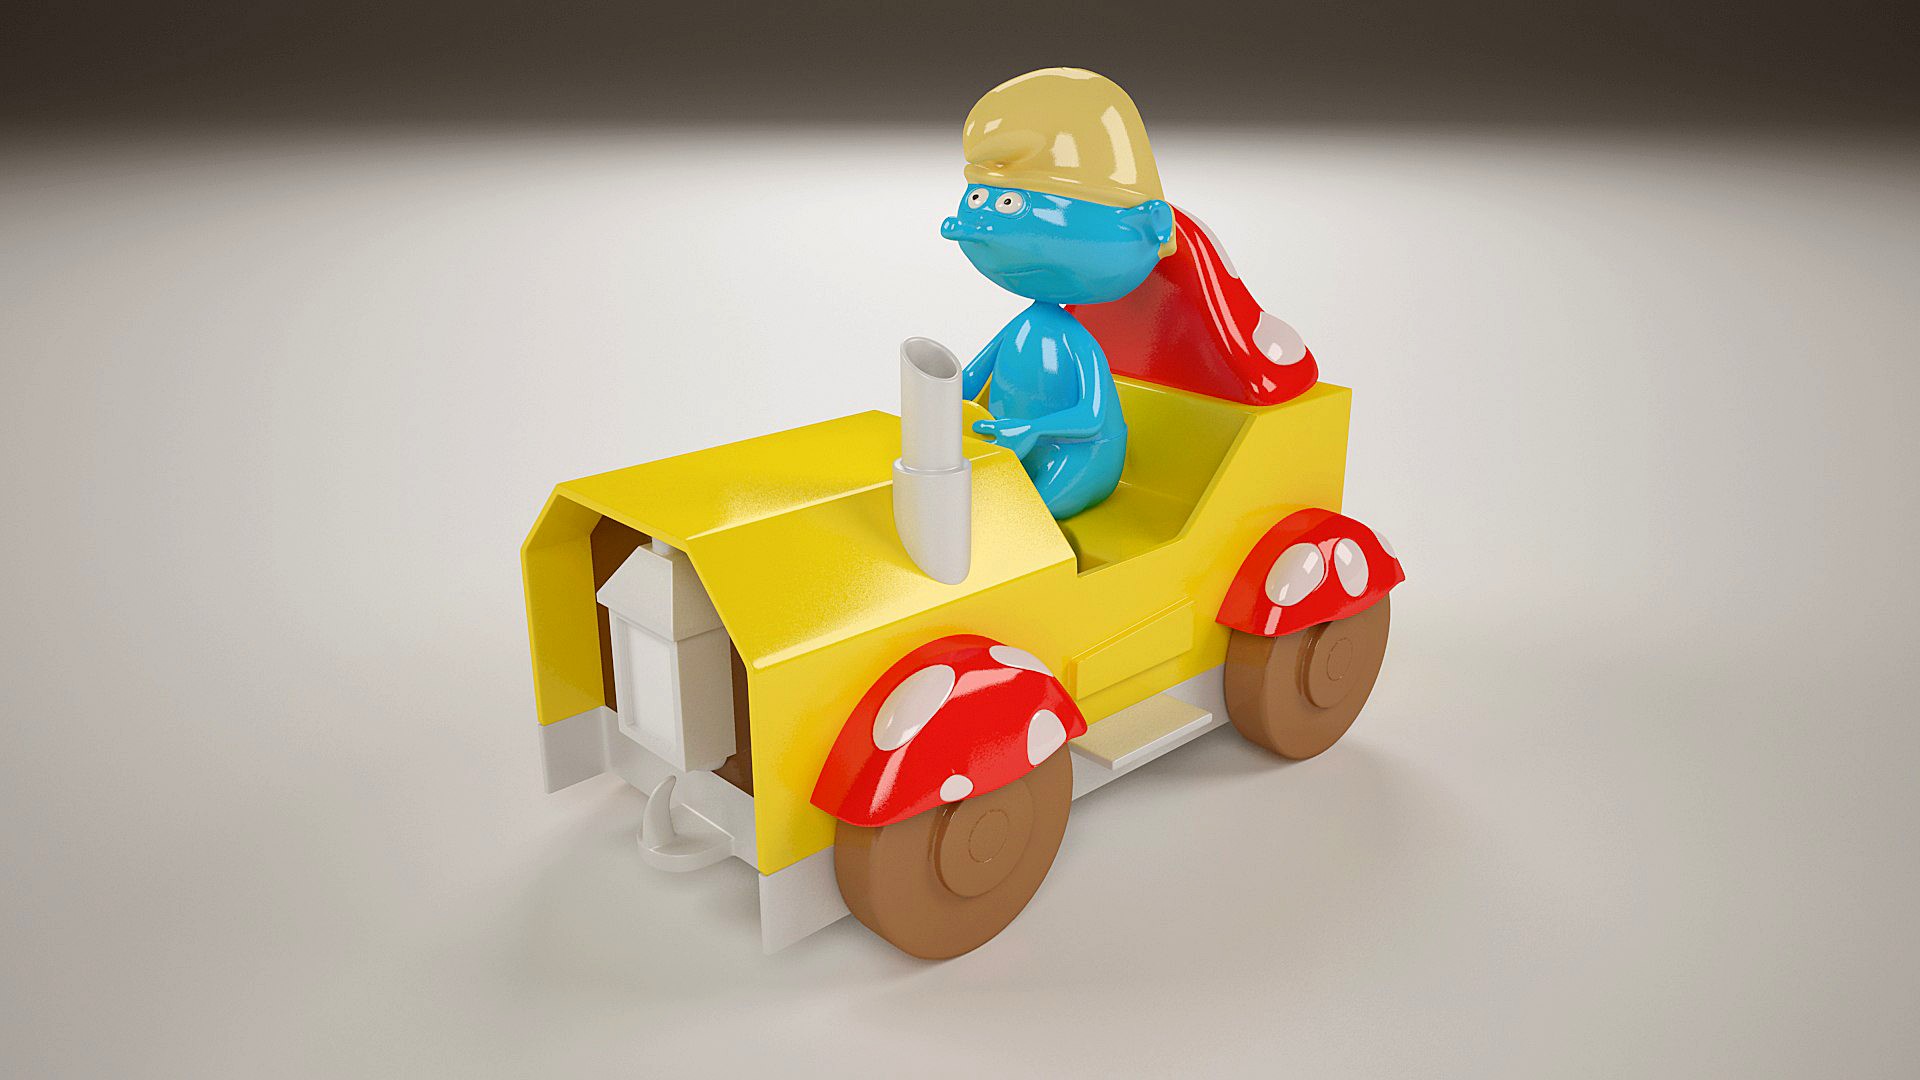 The Smurf Toy